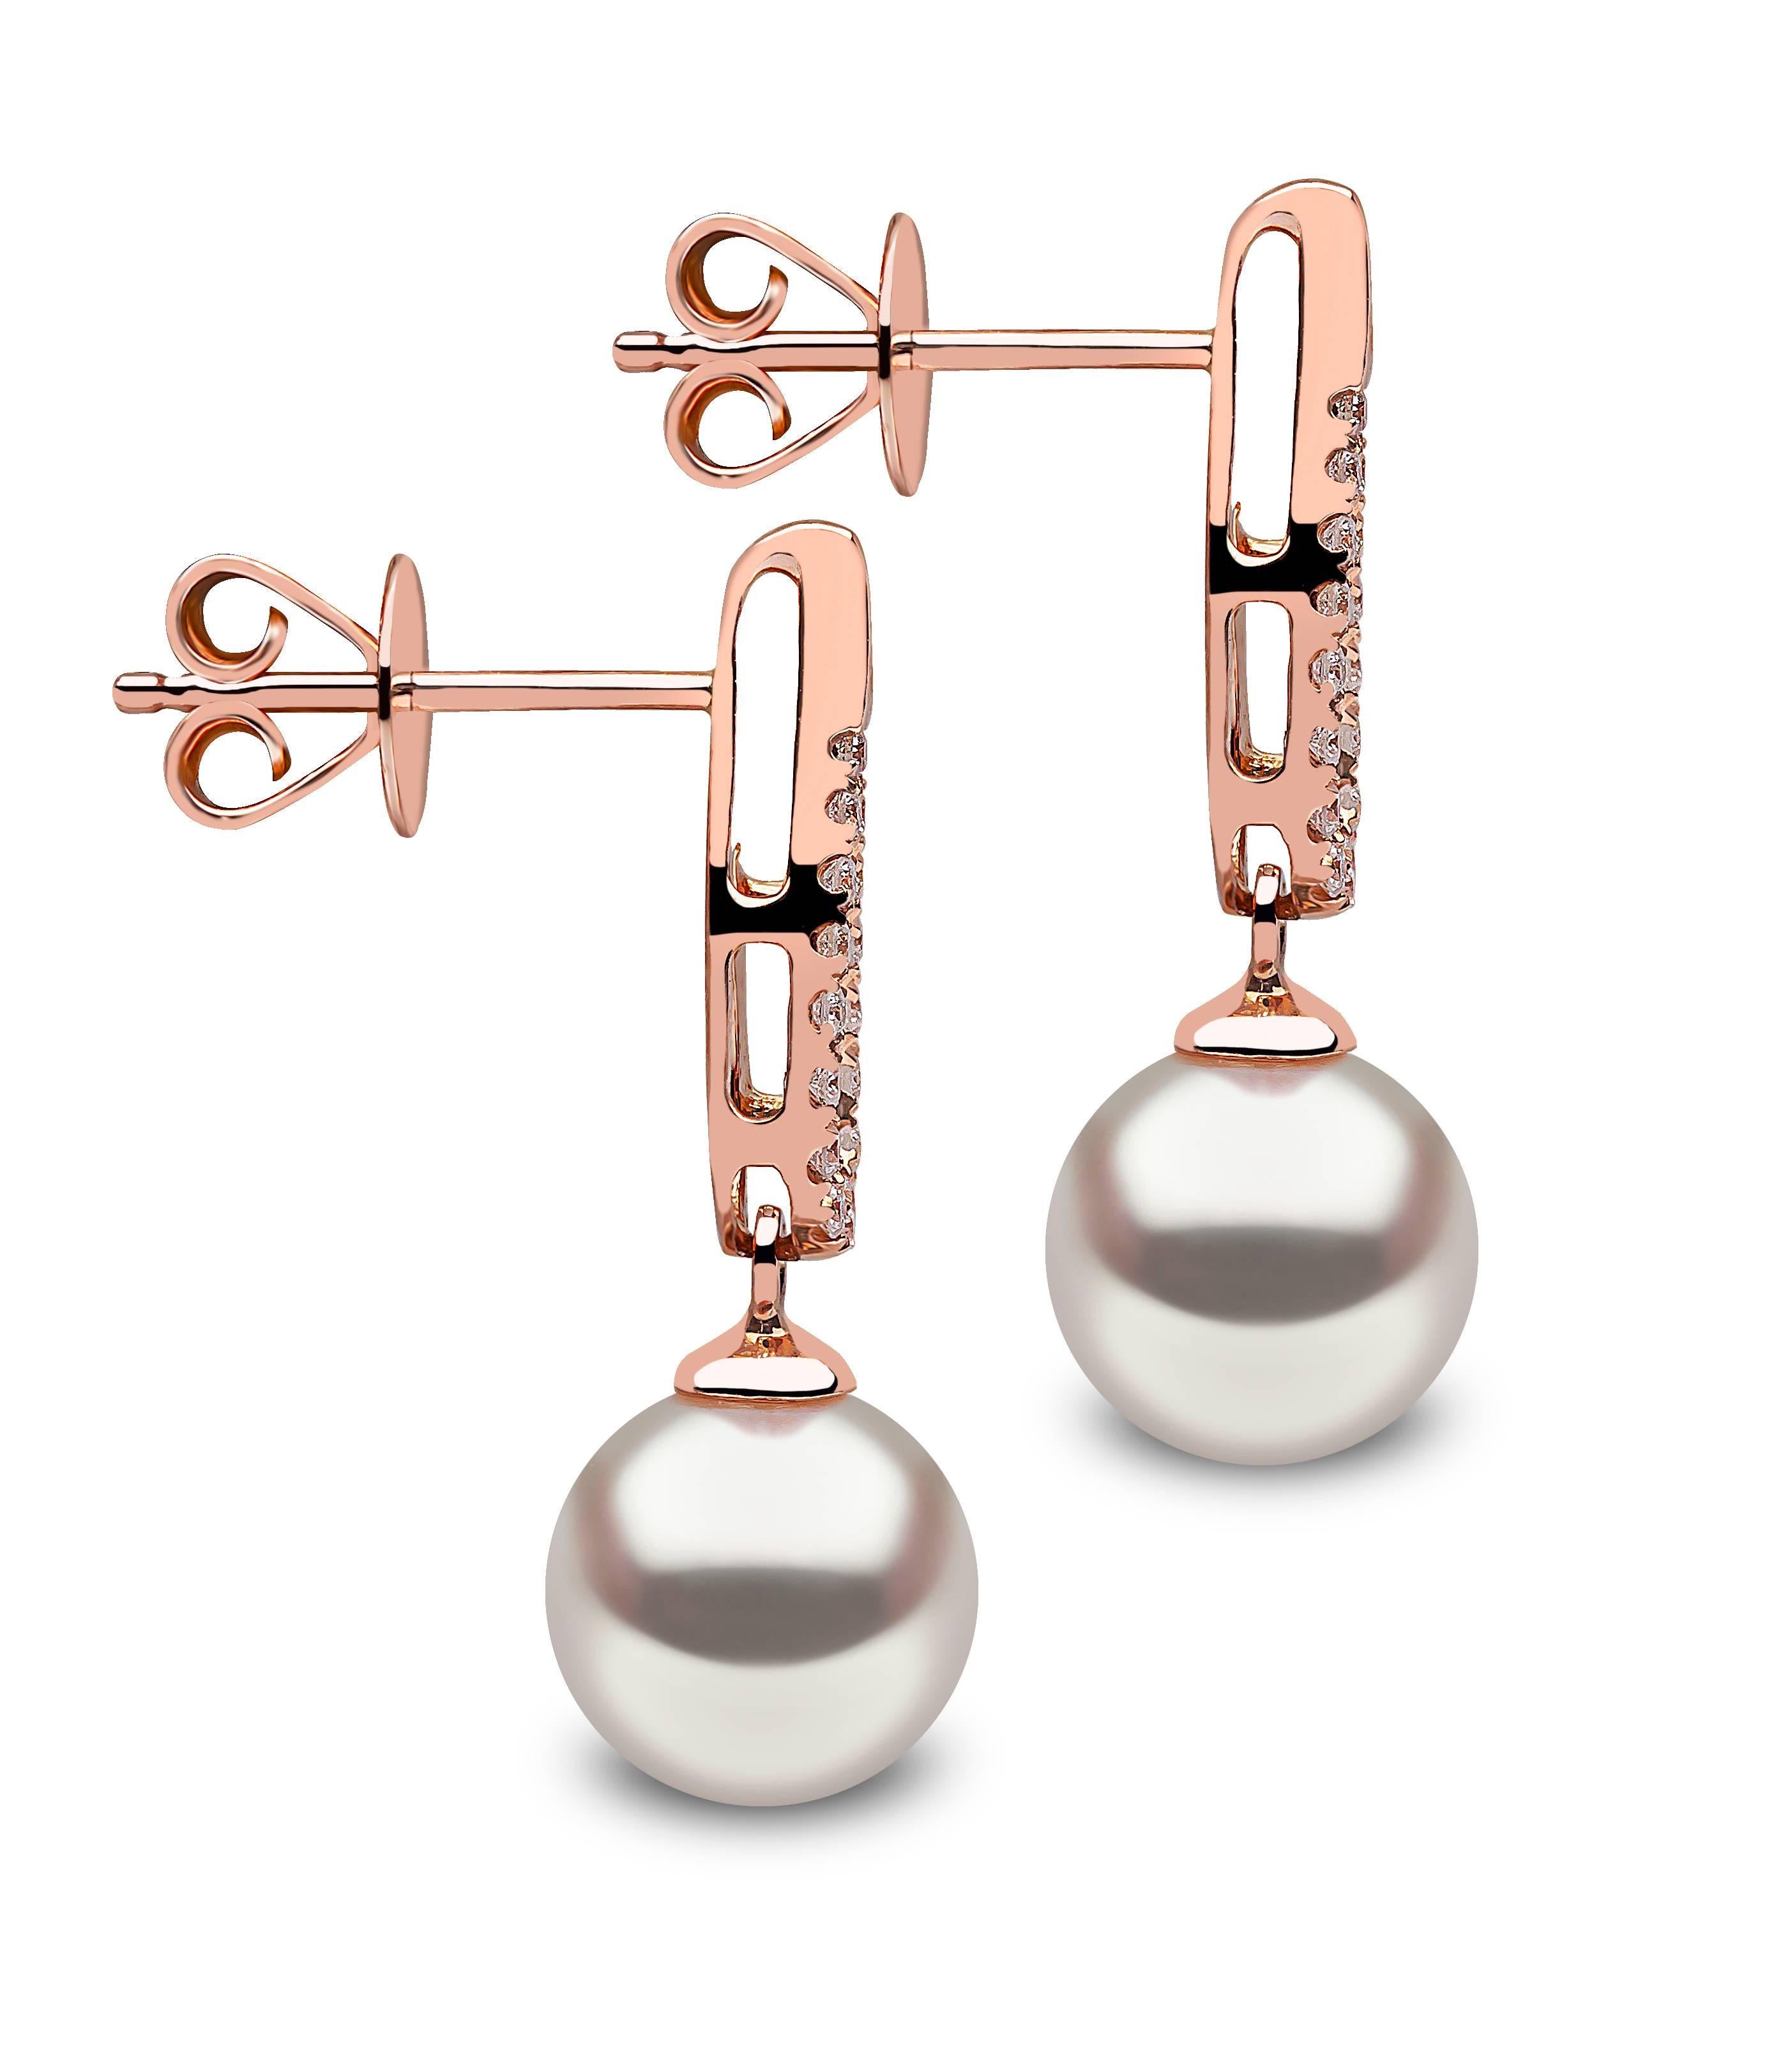 These Japanese Akoya Pearls have been hand selected by Yoko London for their gentle sheen and smooth appearance. Suspended below an elegant pattern of White Diamonds, and hosted in 18 Karat Rose Gold, these earrings are the height of sophistication,